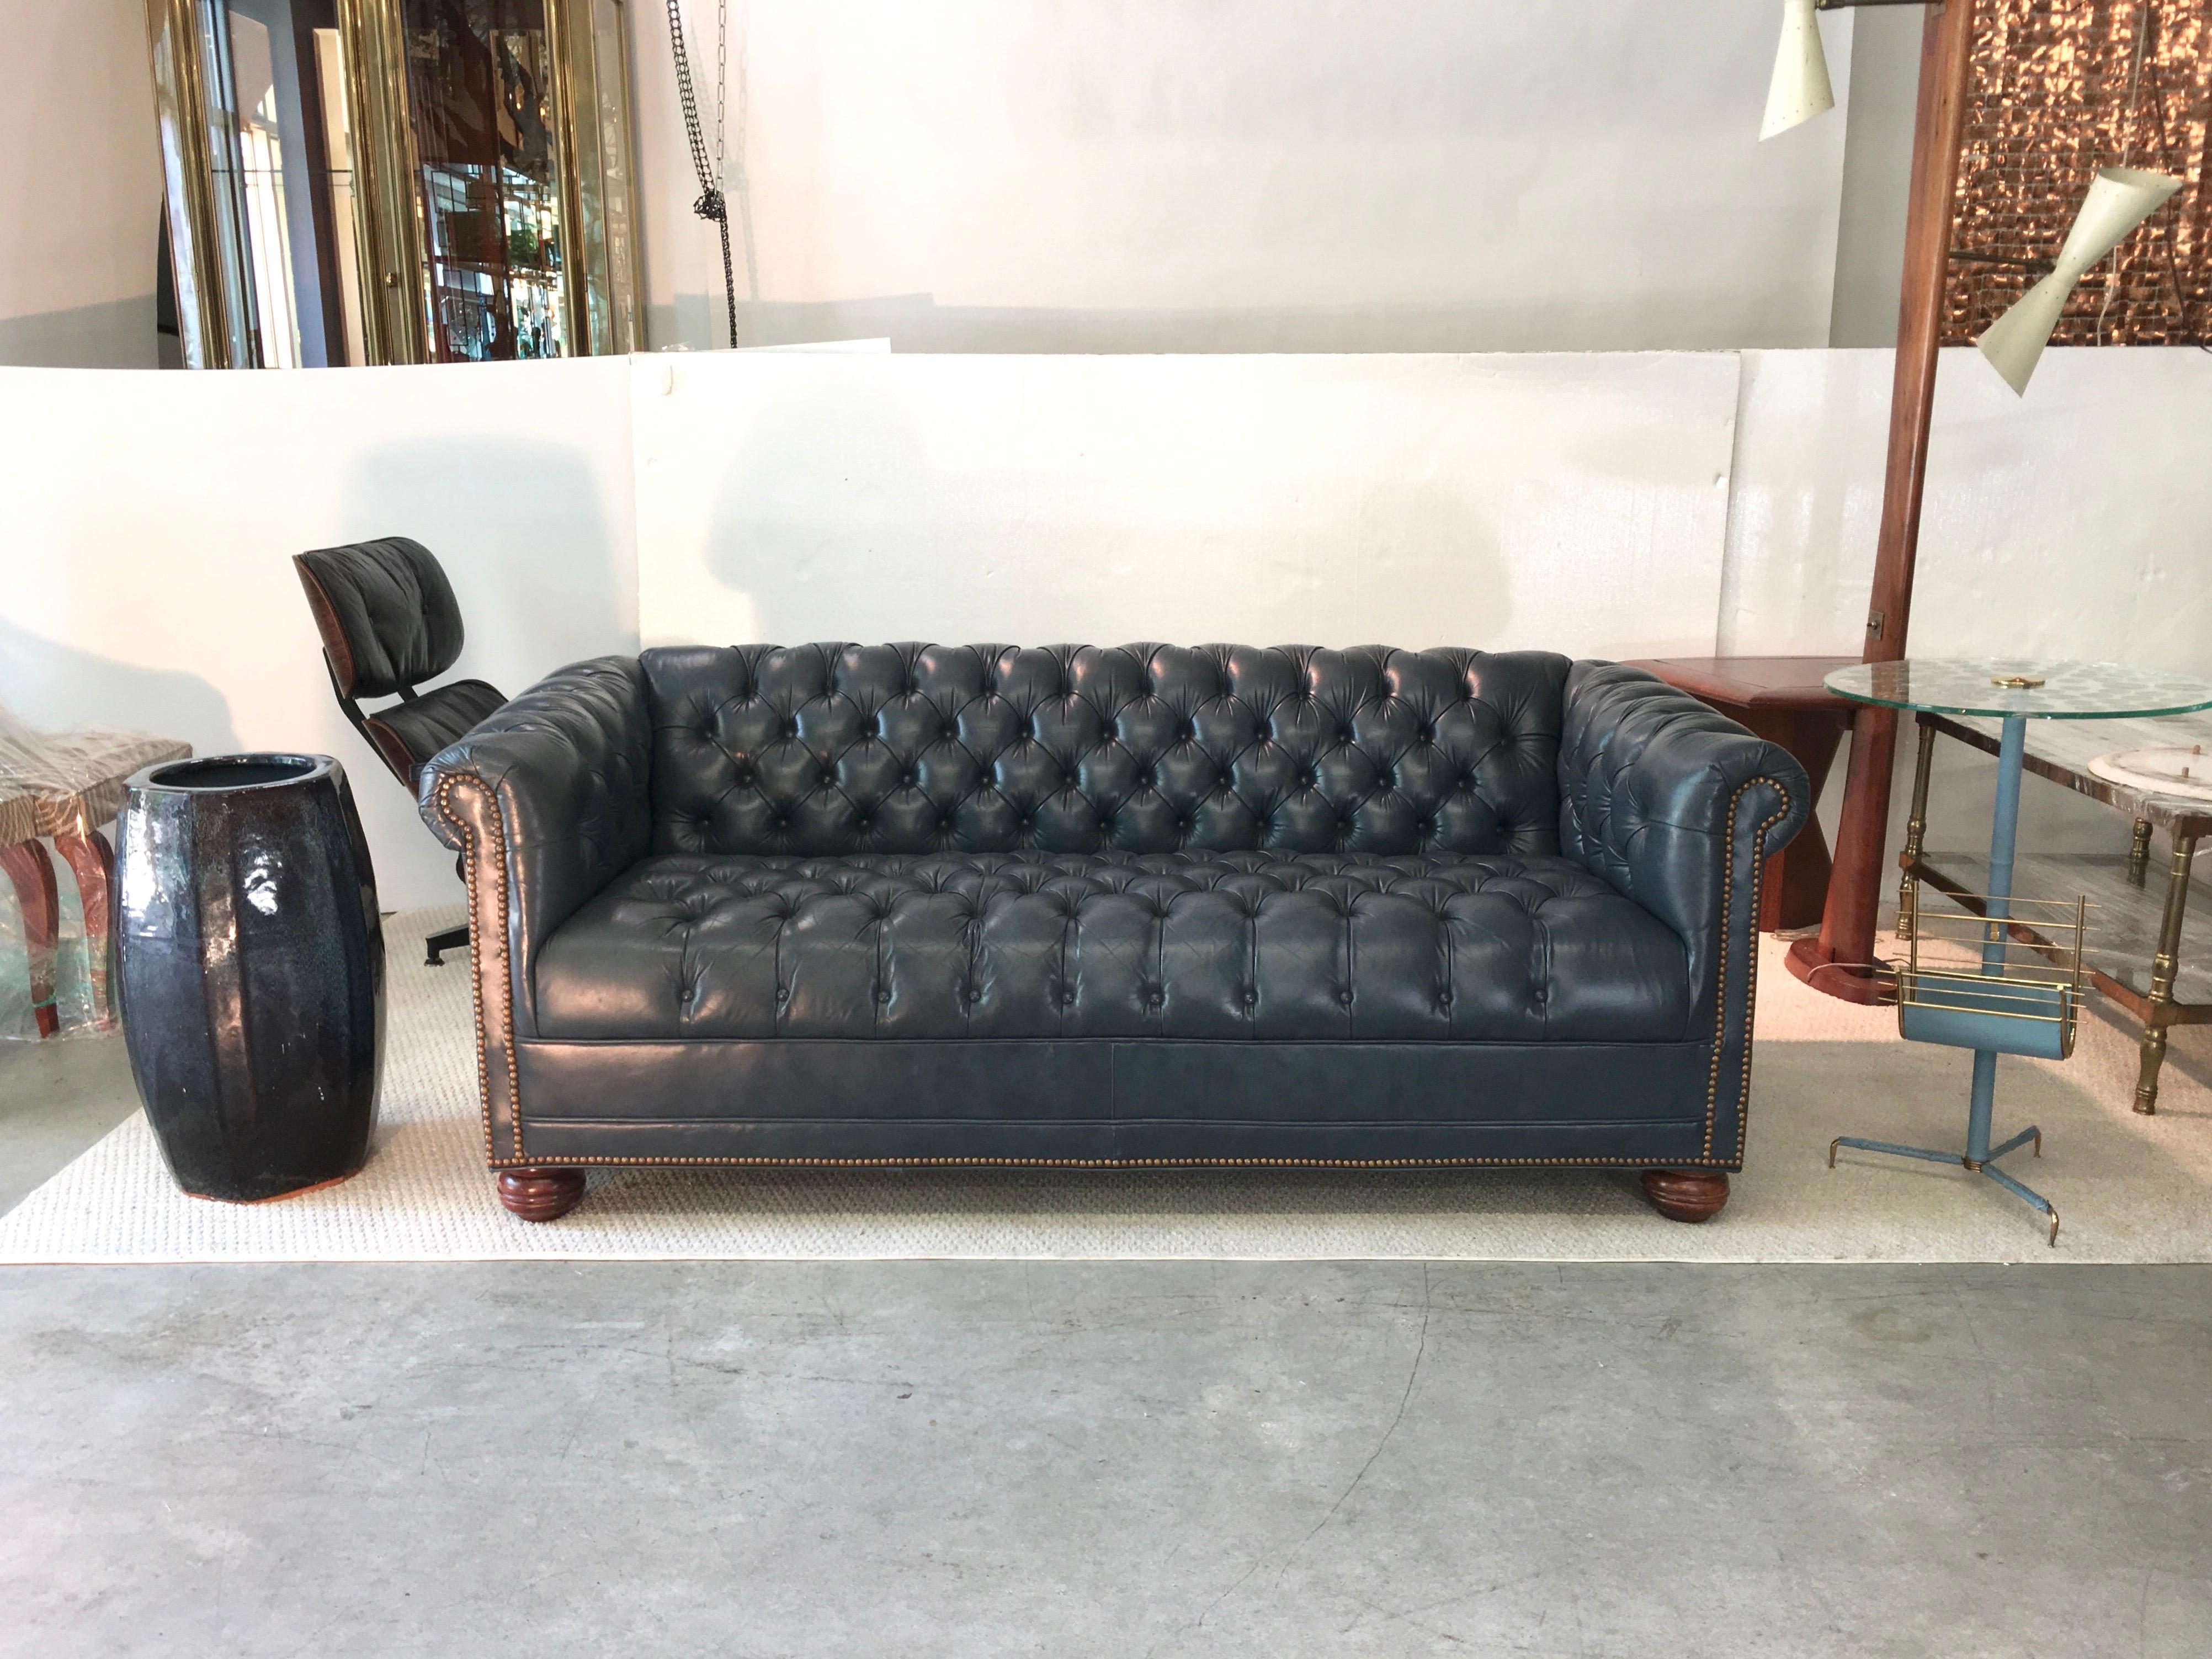 Edwardian Vintage Chesterfield Sofa in Slate Blue Leather